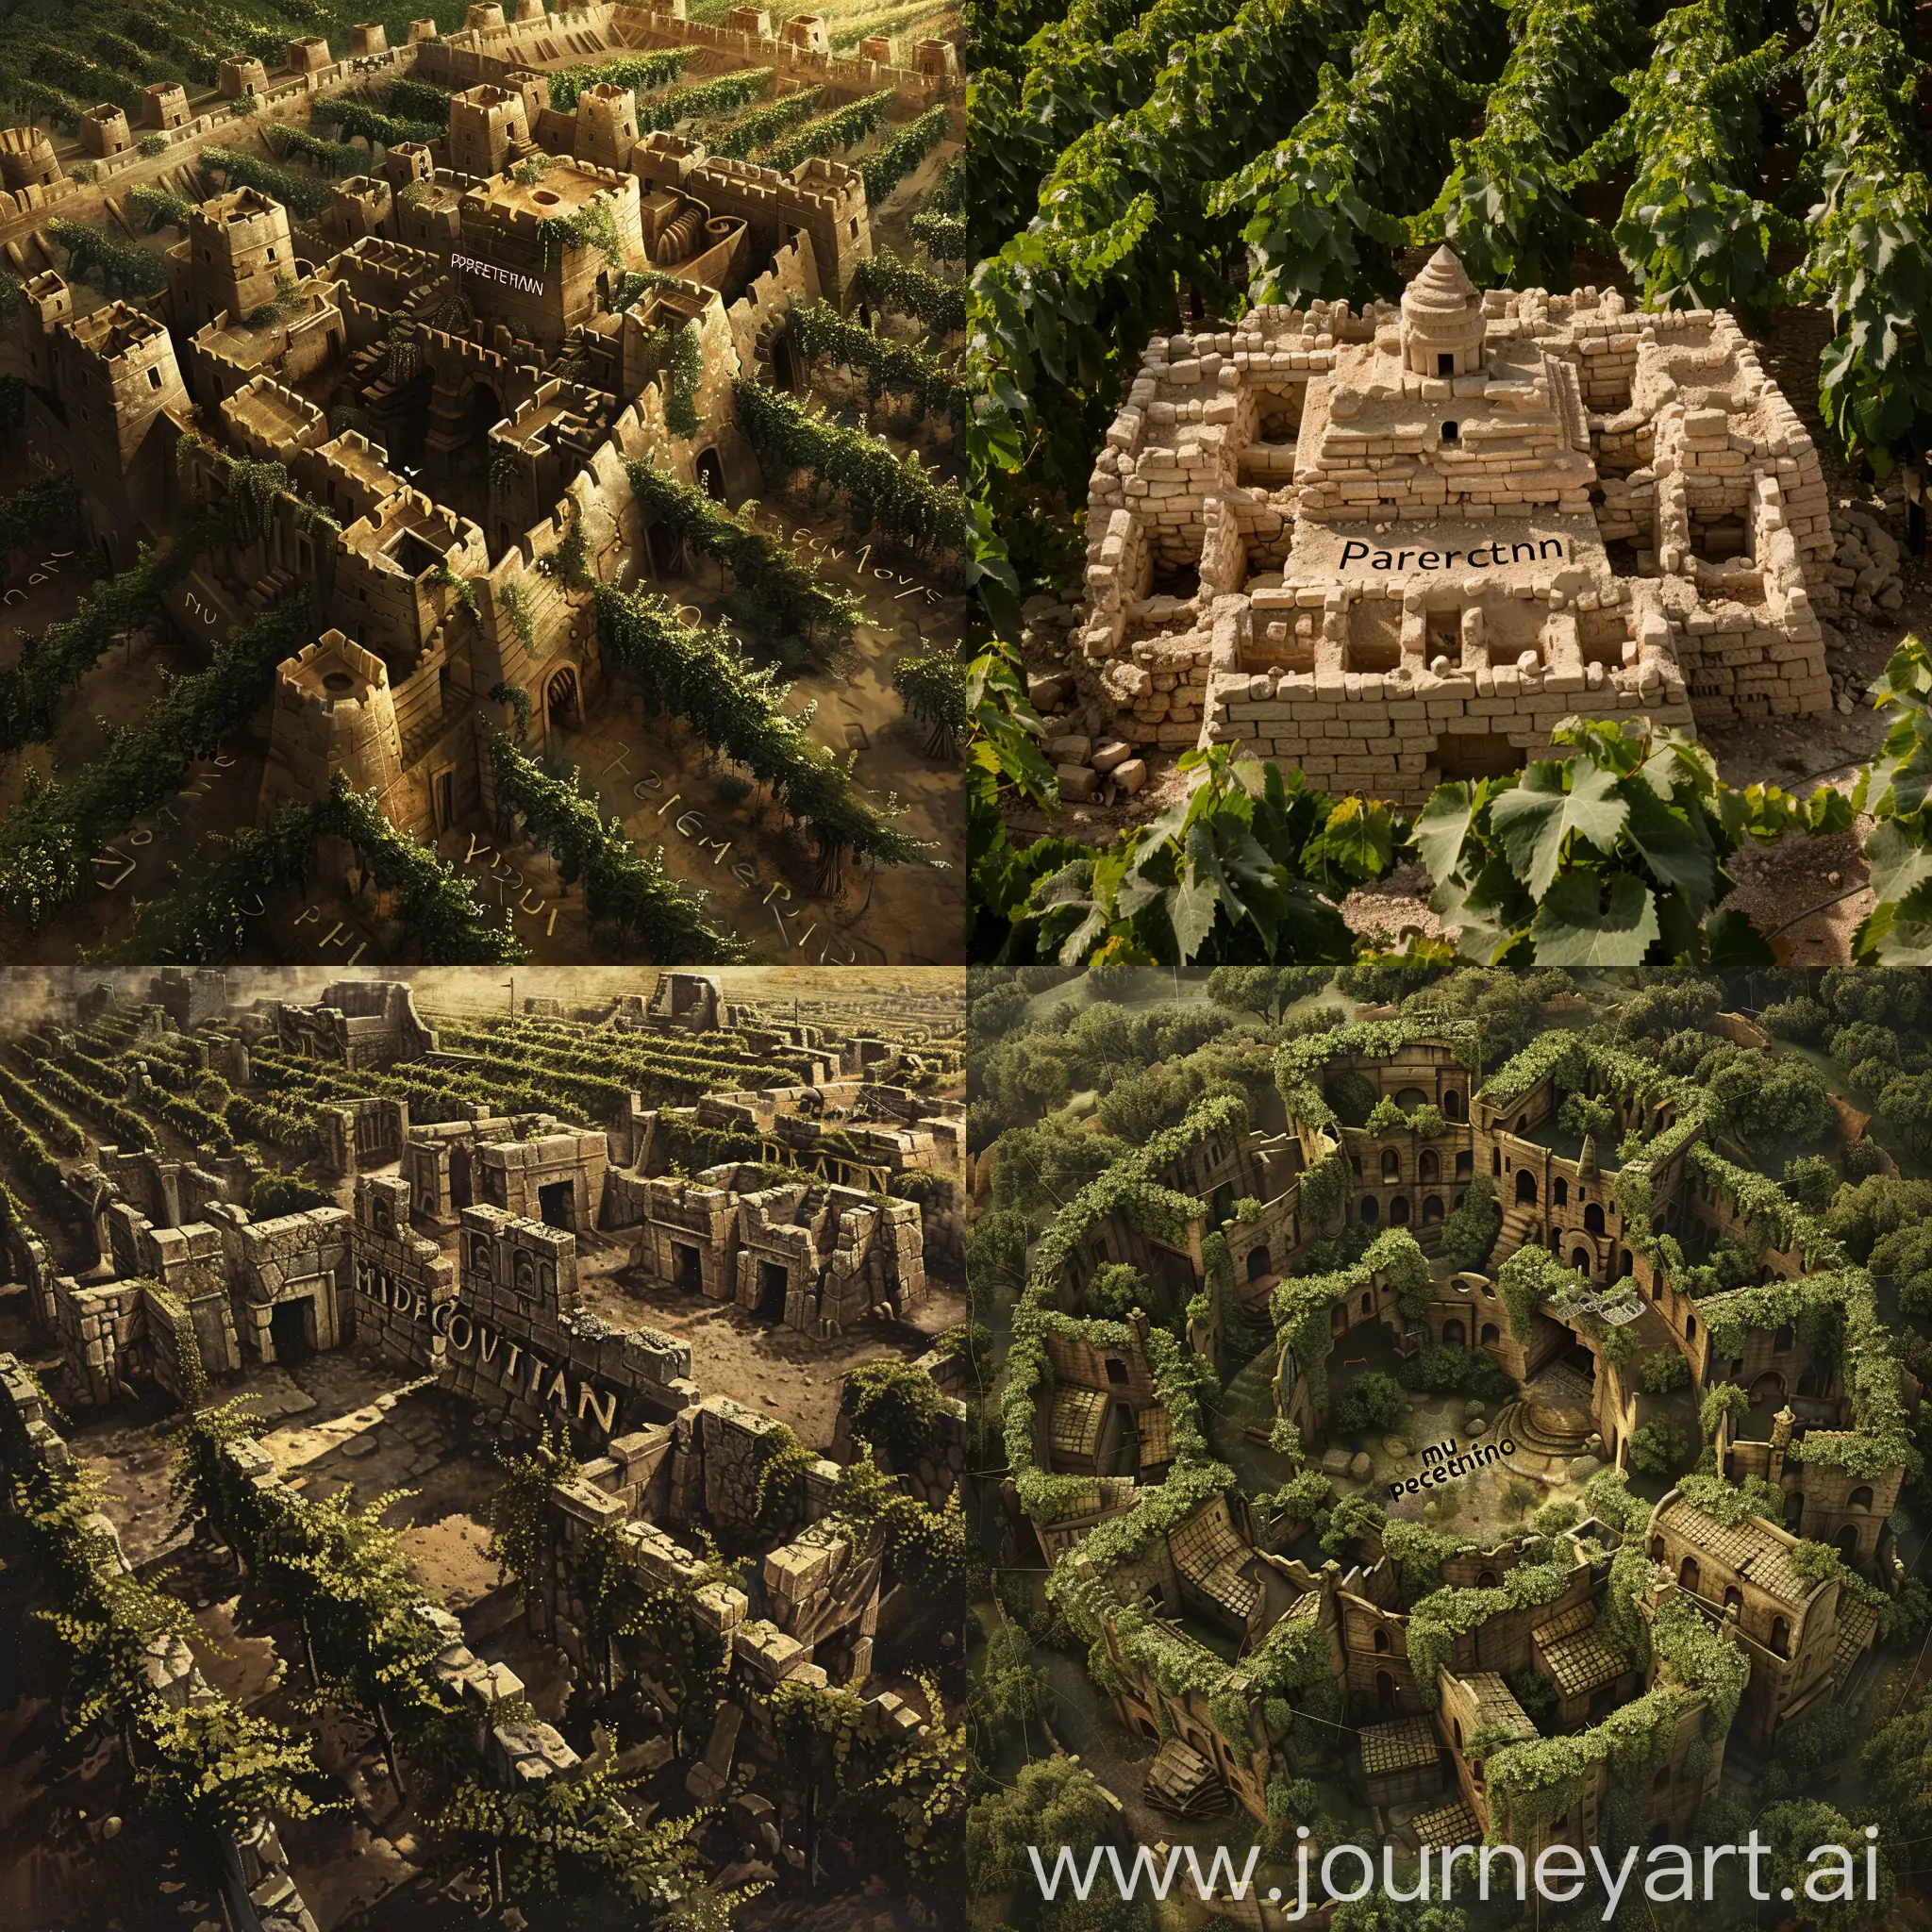 an ancient city surrounded by manu vines and in the middle the name "protection"
